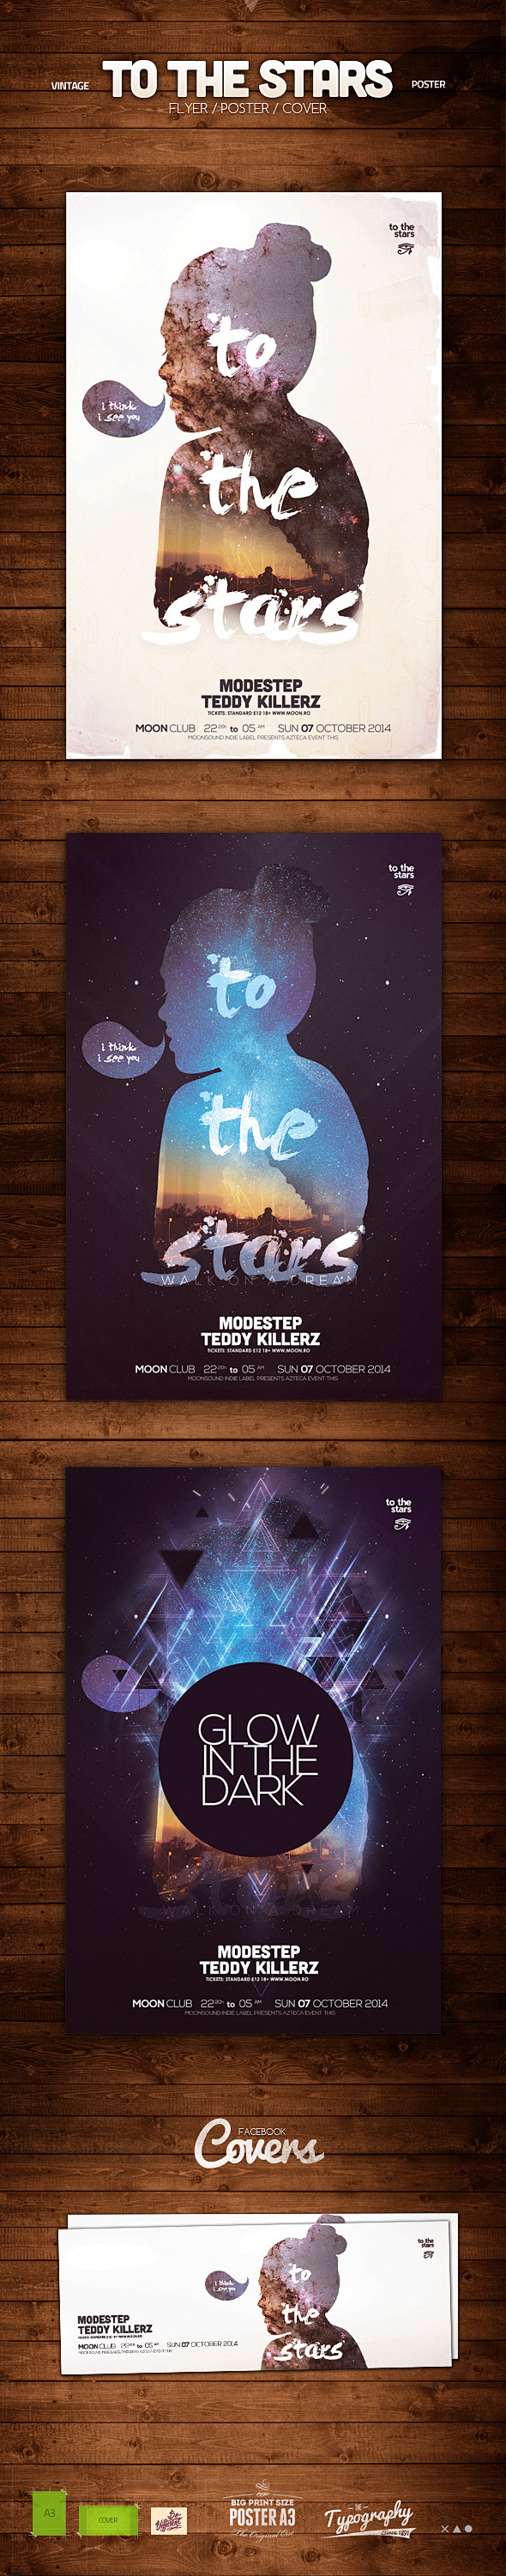 To the Stars Poster ...